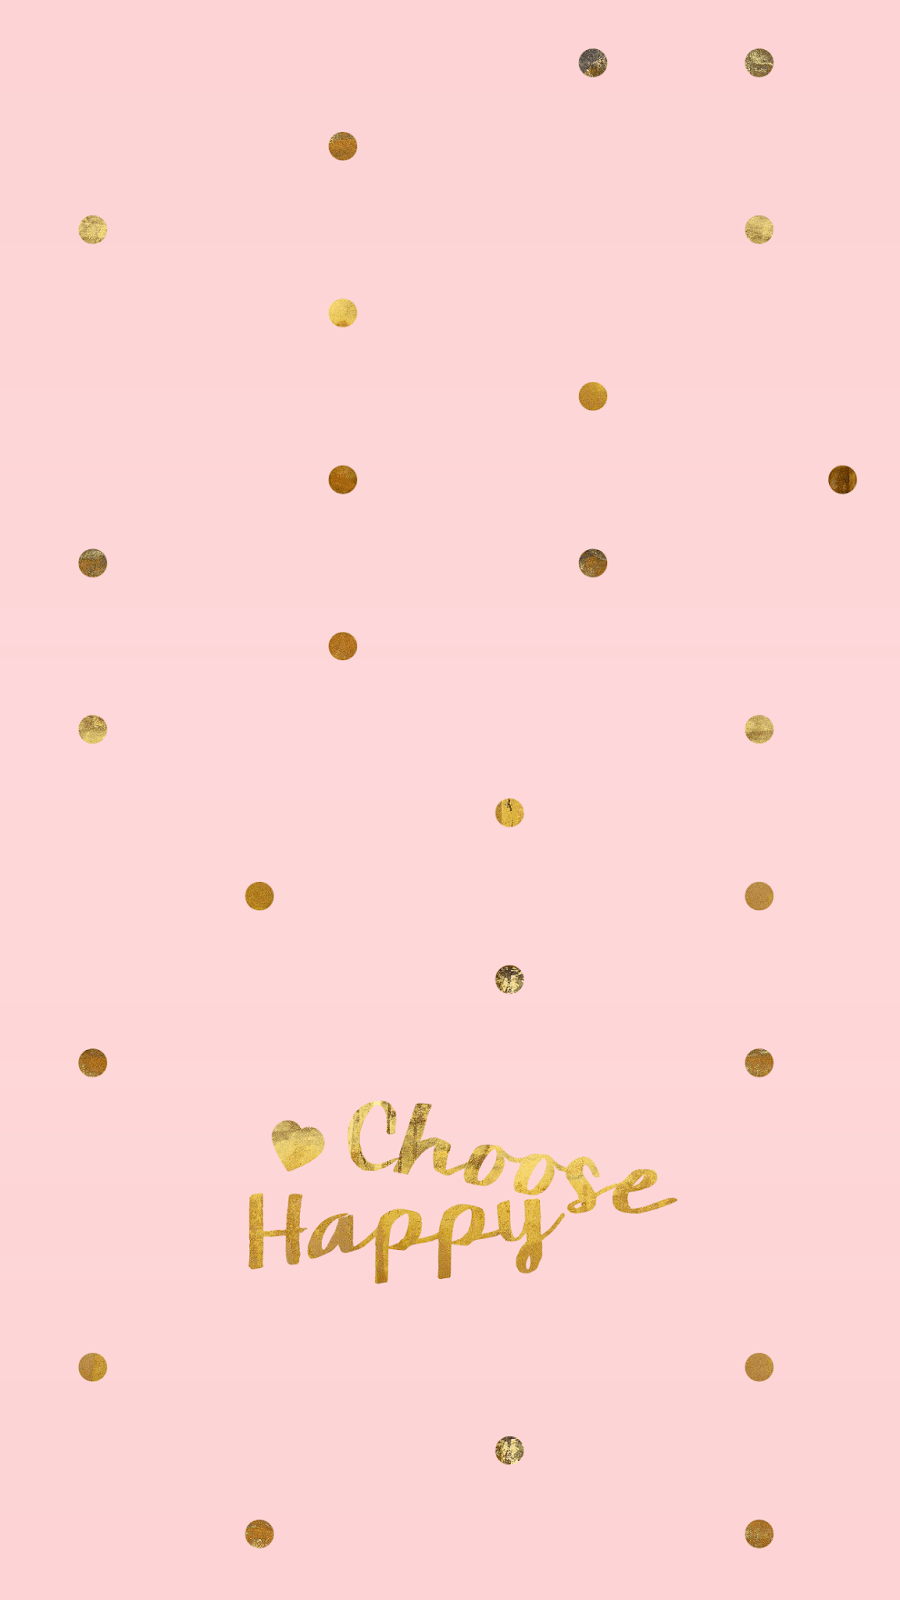 Lou Becca Bee: Wallpaper Background For Phones. D O W N L O A D